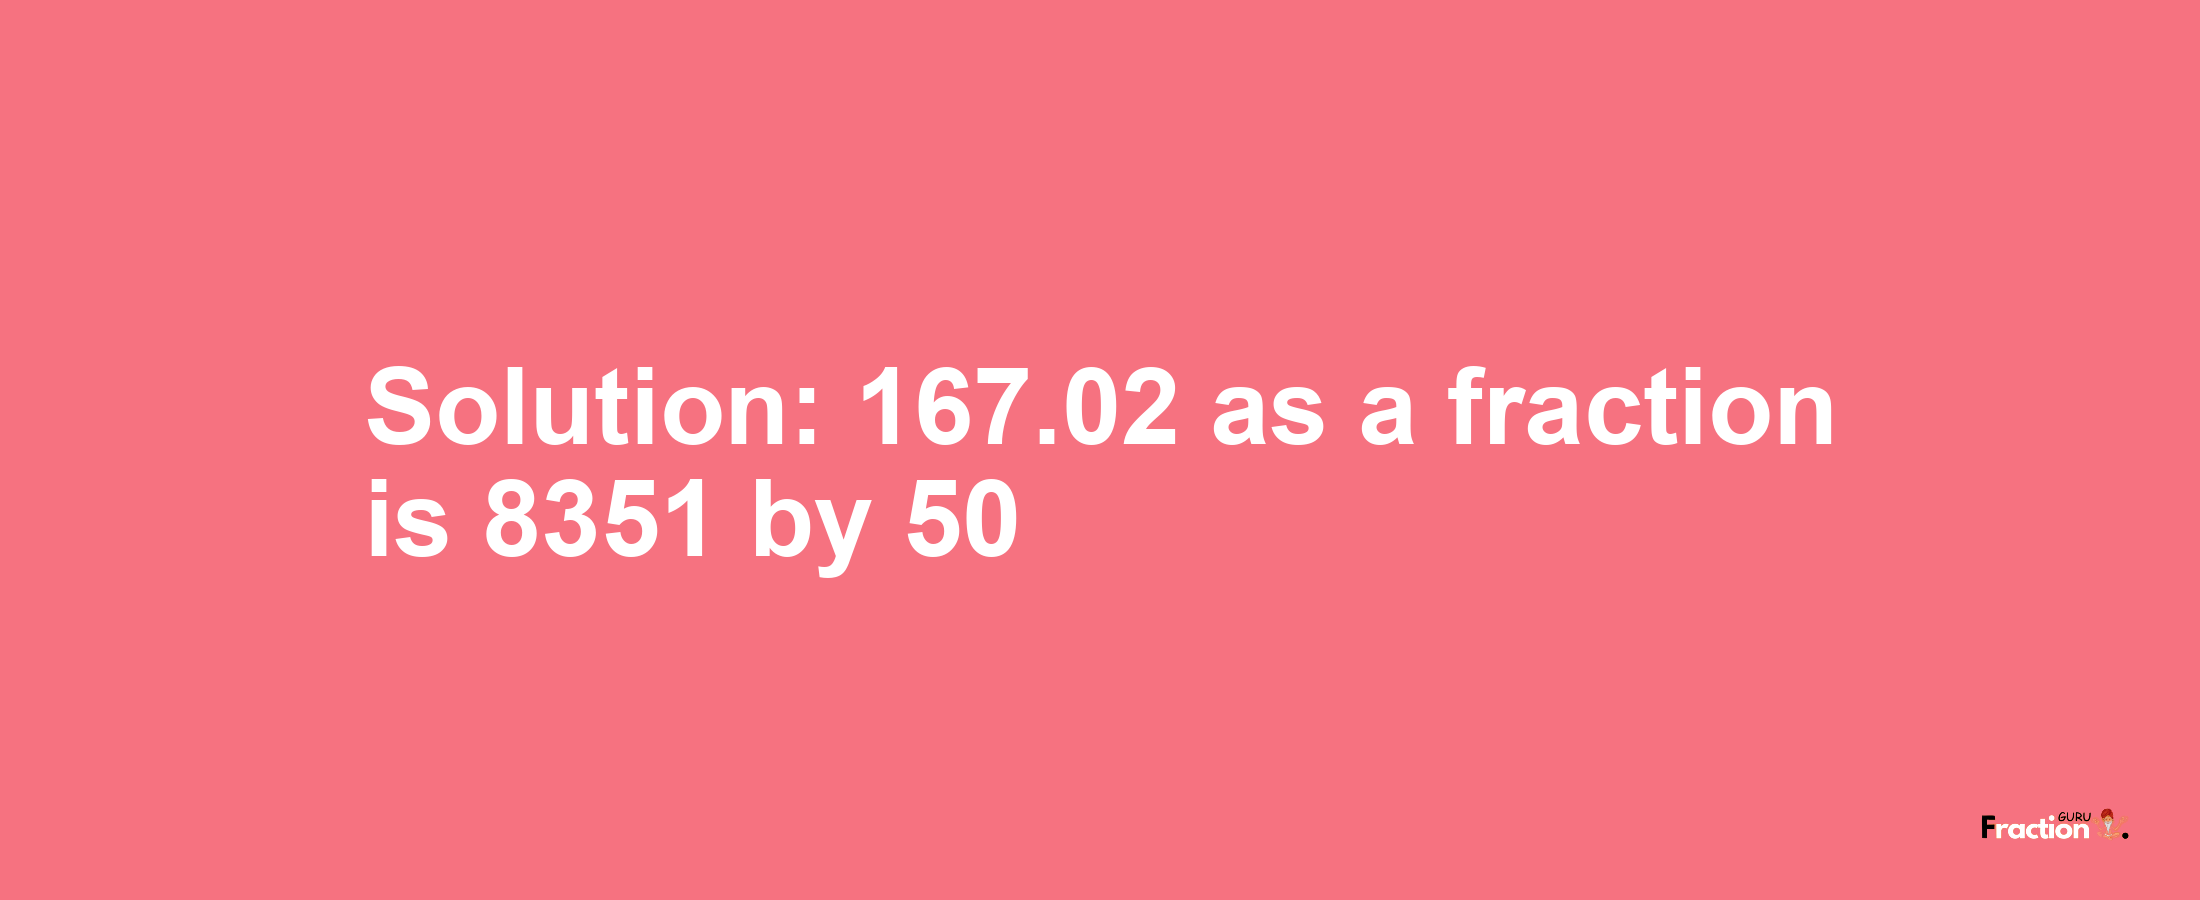 Solution:167.02 as a fraction is 8351/50